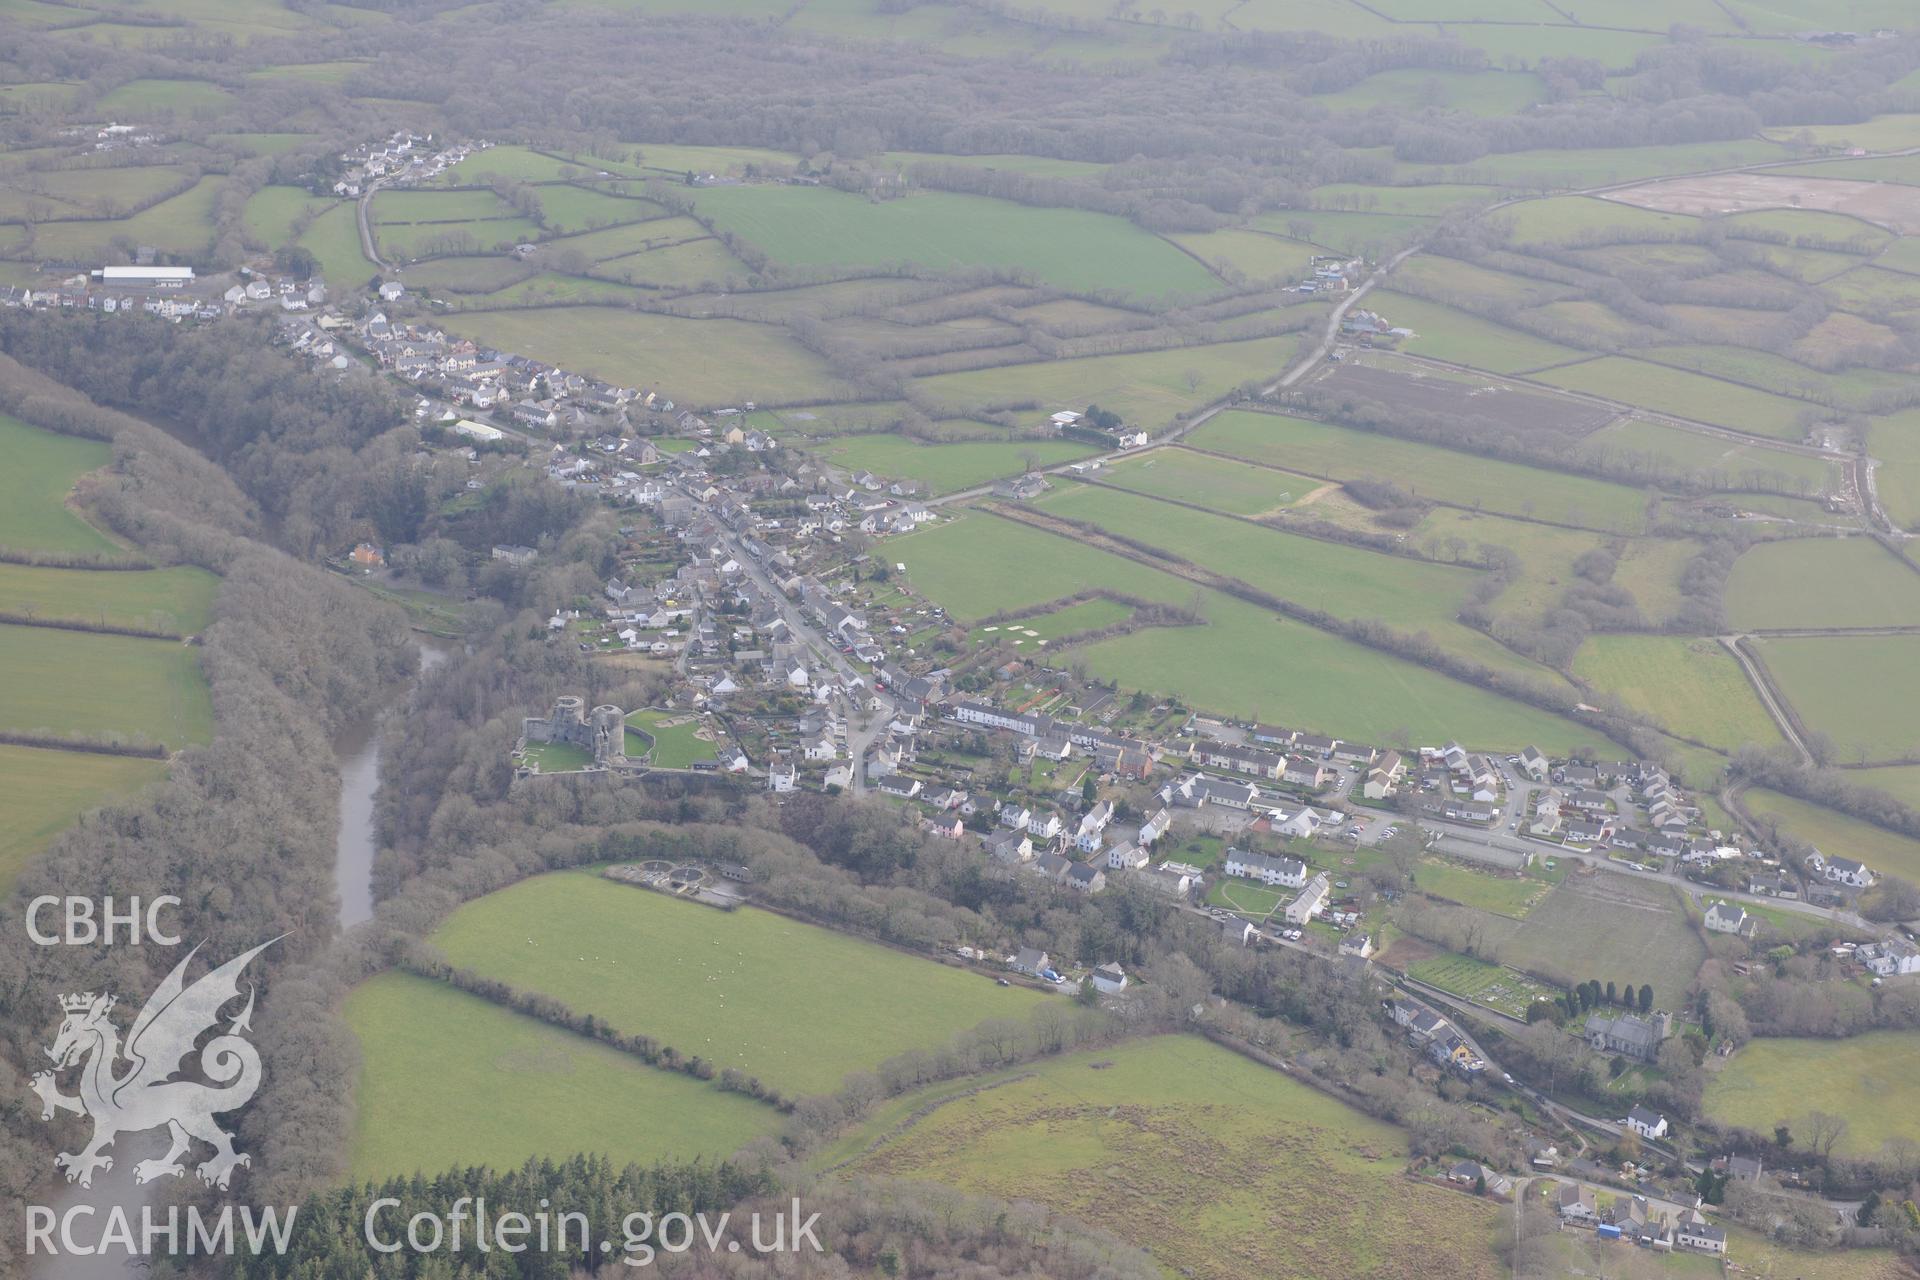 Cilgerran Castle and St Llawddog's church in the village of Cilgerran, south of Cardigan. Oblique aerial photograph taken during the Royal Commission's programme of archaeological aerial reconnaissance by Toby Driver on 13th March 2015.